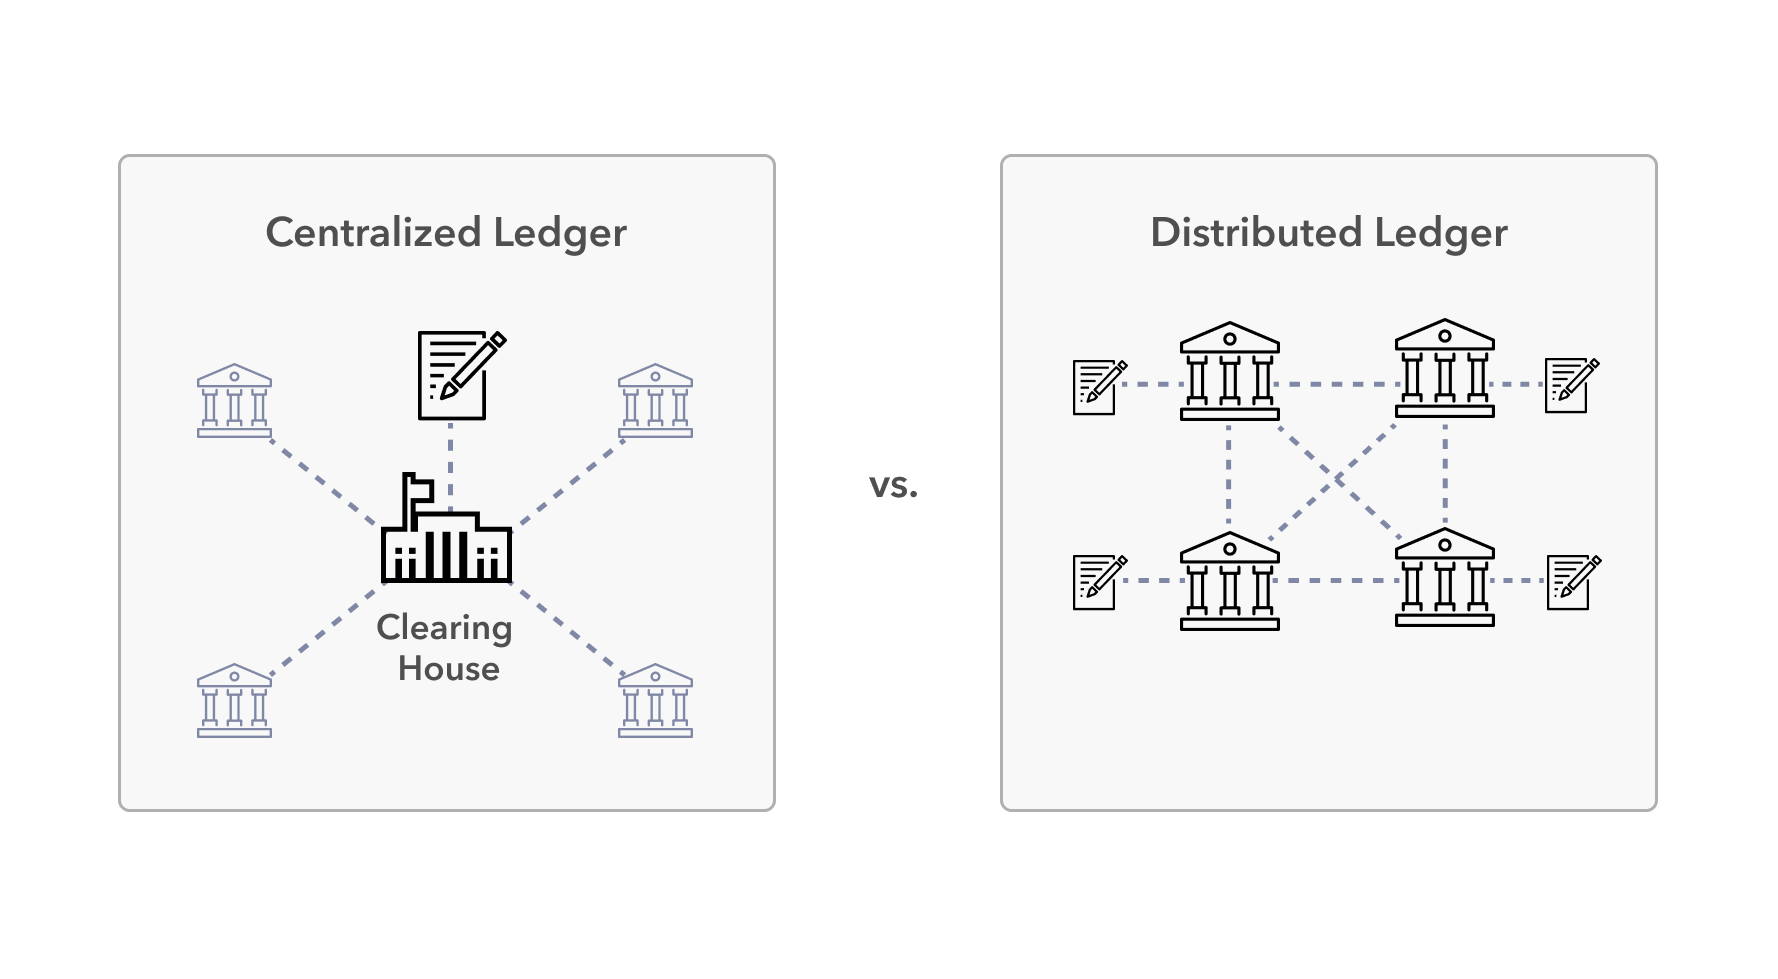 Bitcoin uses a decentralized ledger to ensure an open, honest monetary system.